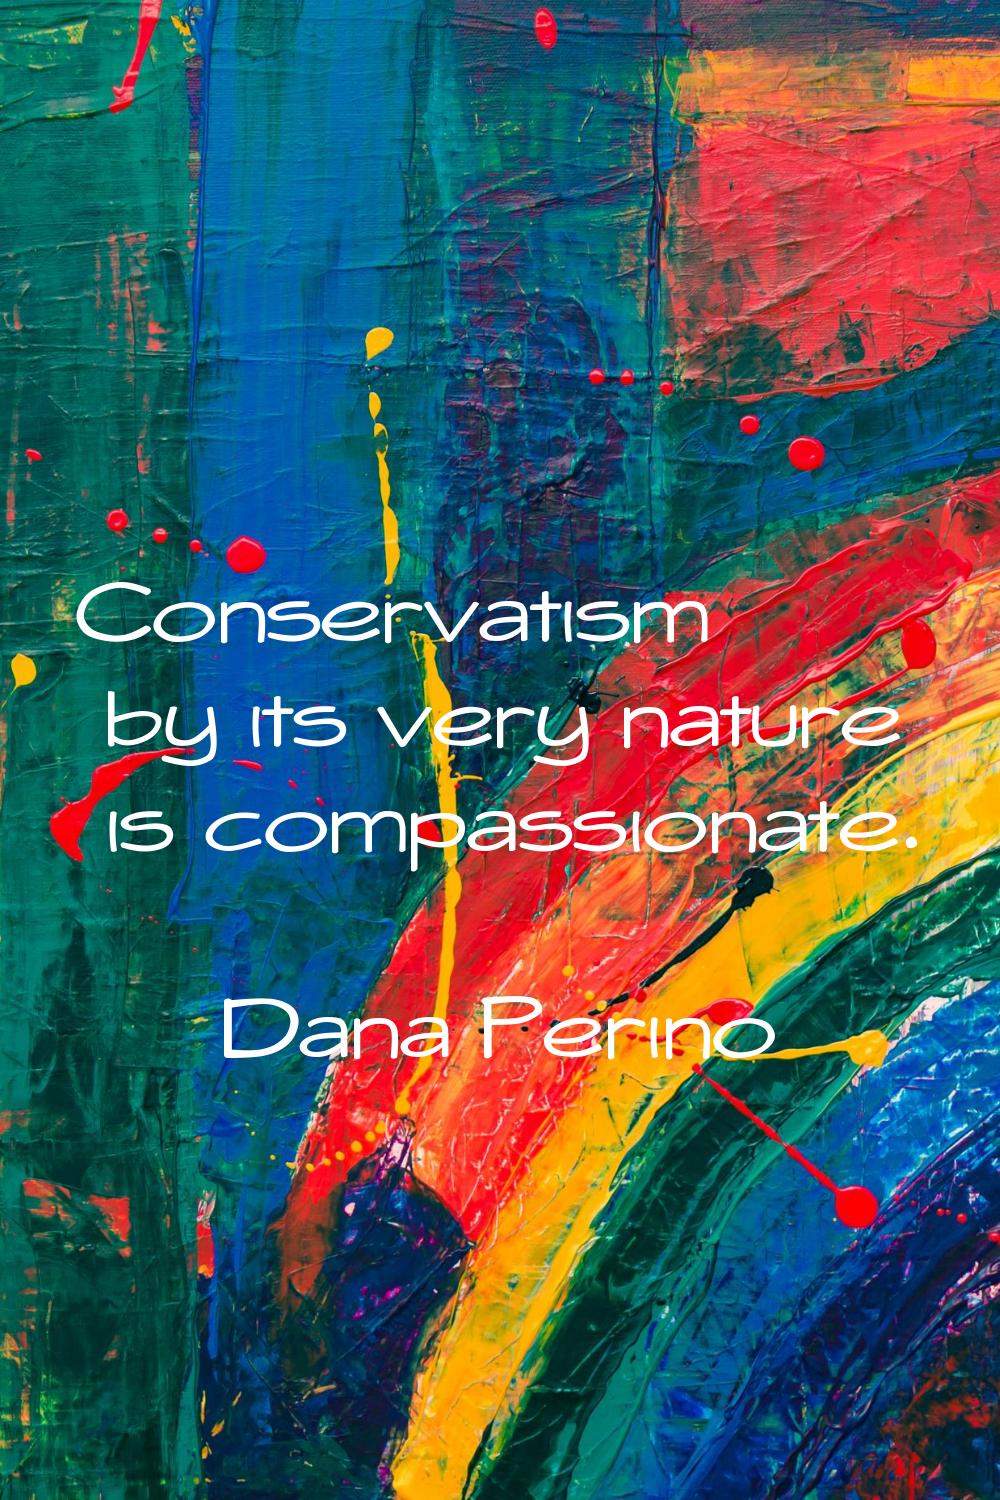 Conservatism by its very nature is compassionate.